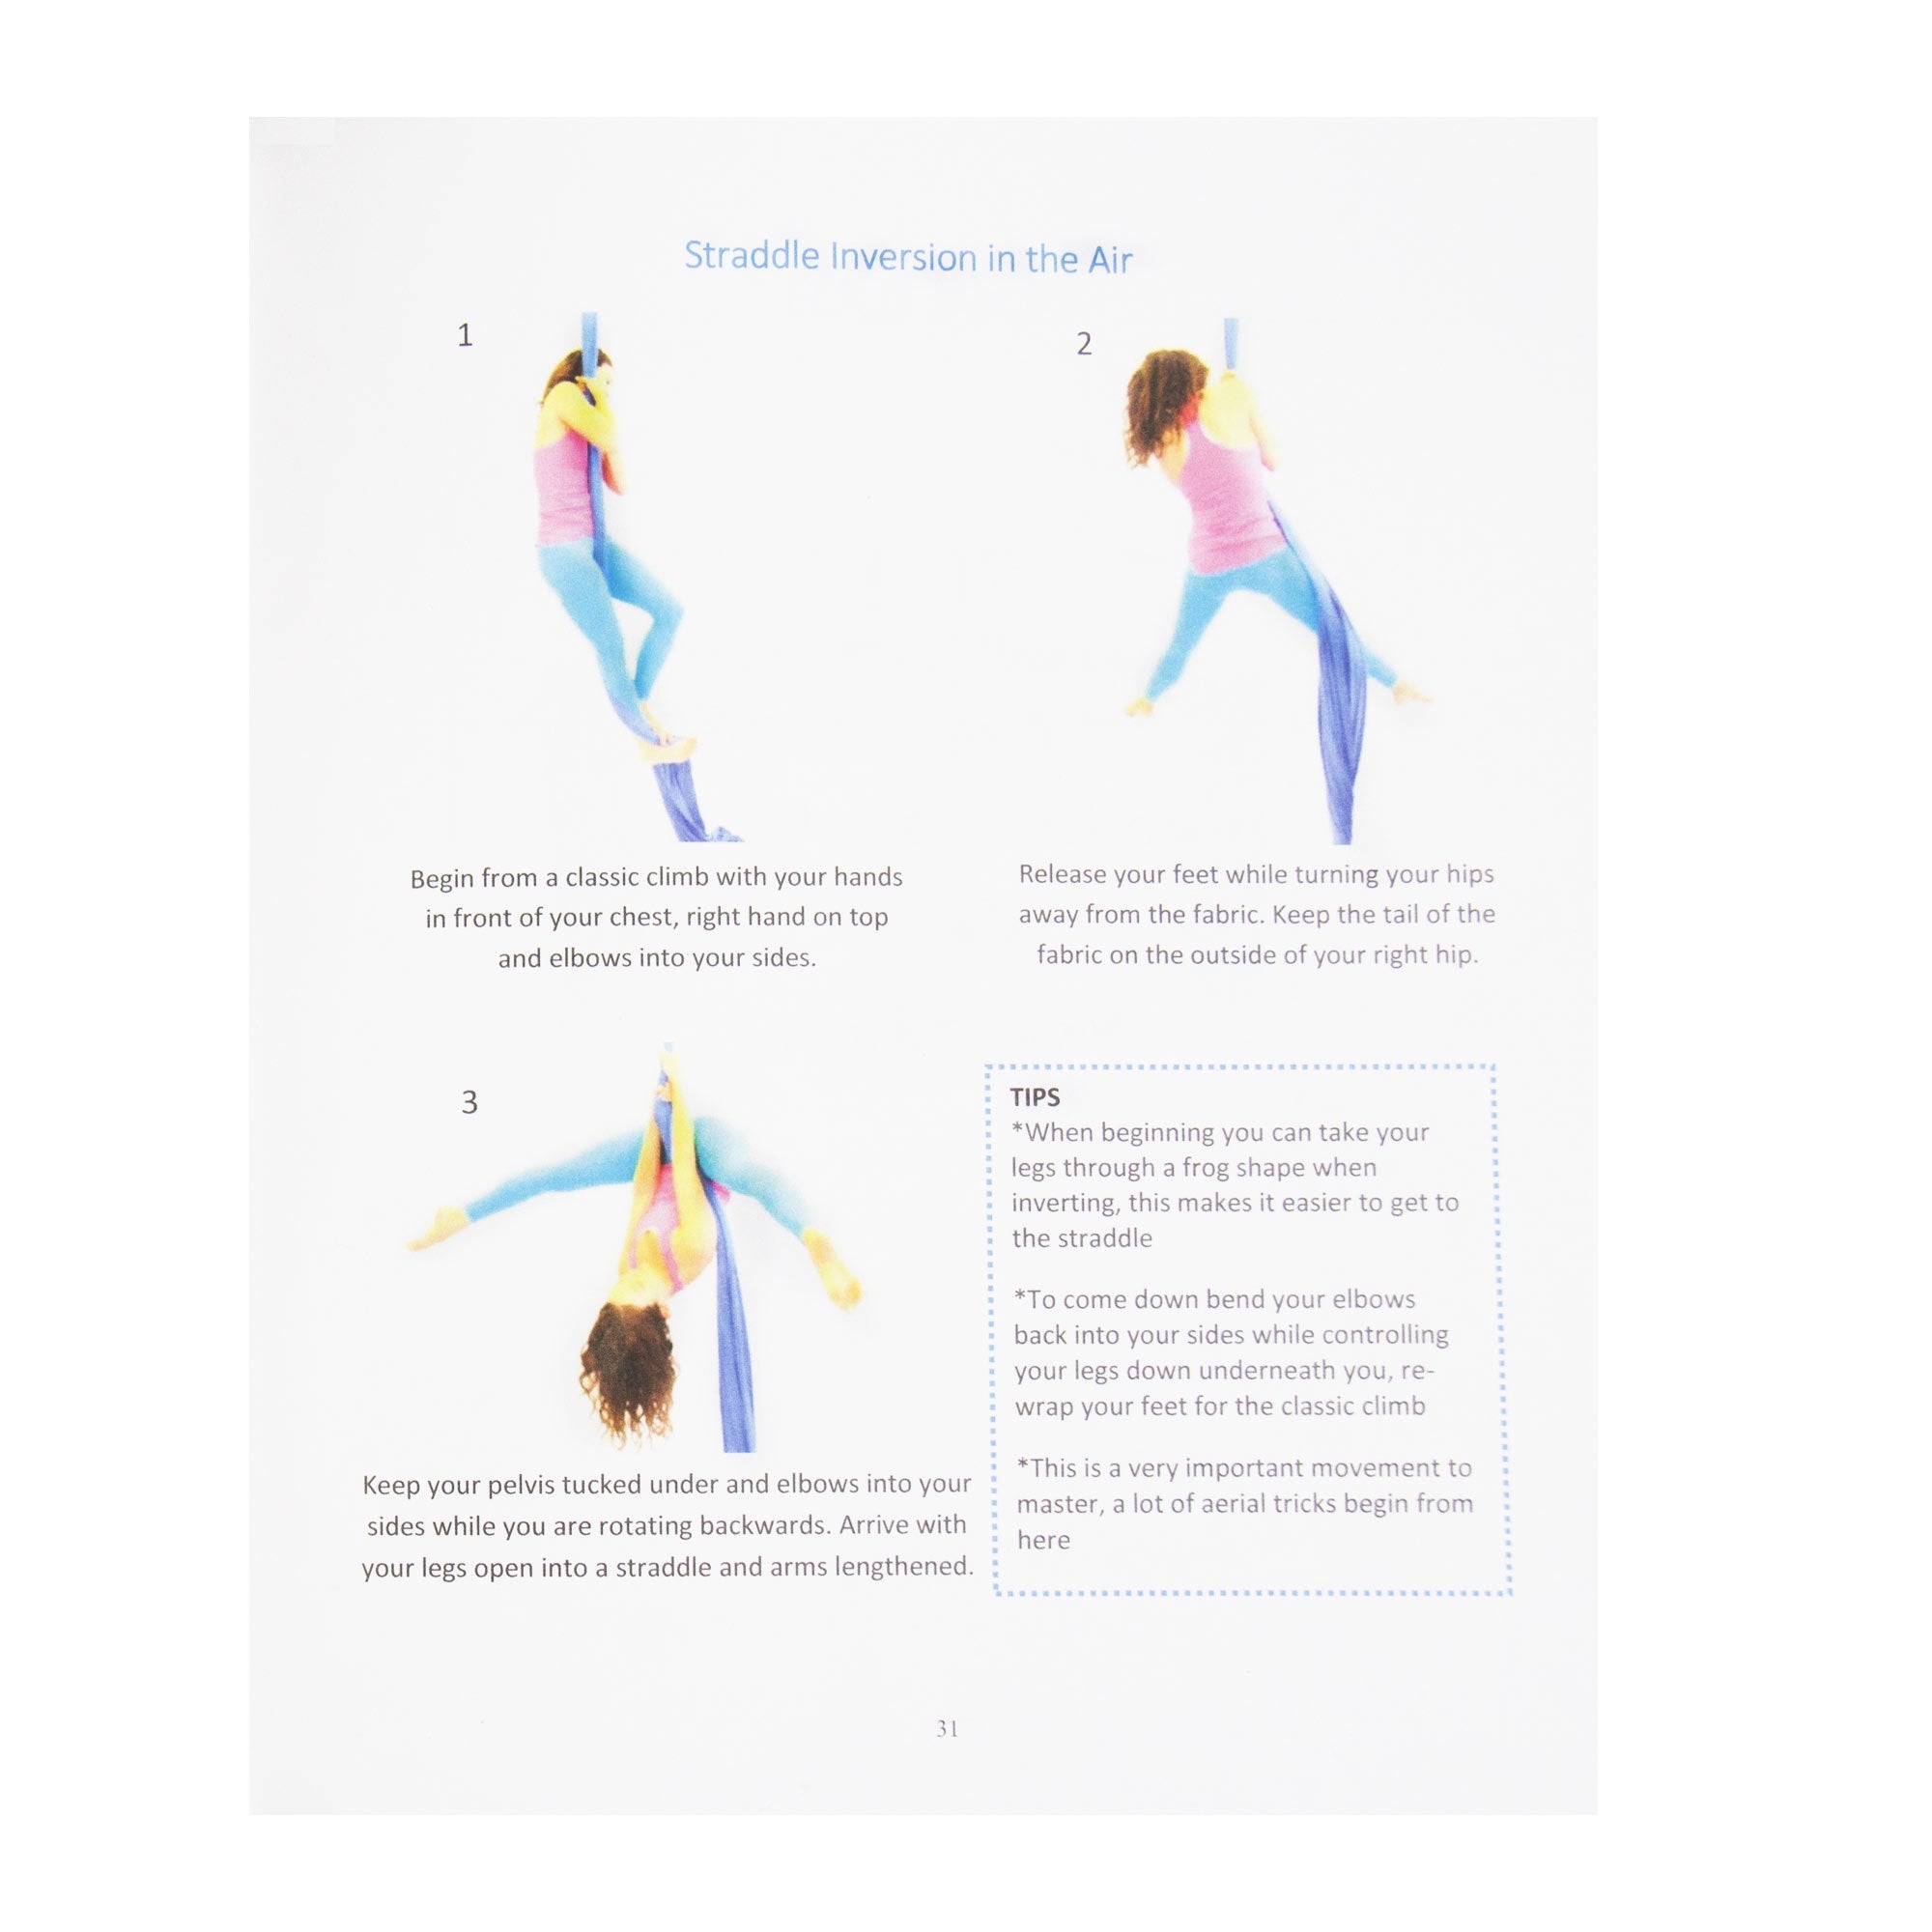 Beginner's Guide to Aerial Silk example page showing straddle inversion with illustrations, text, and tips